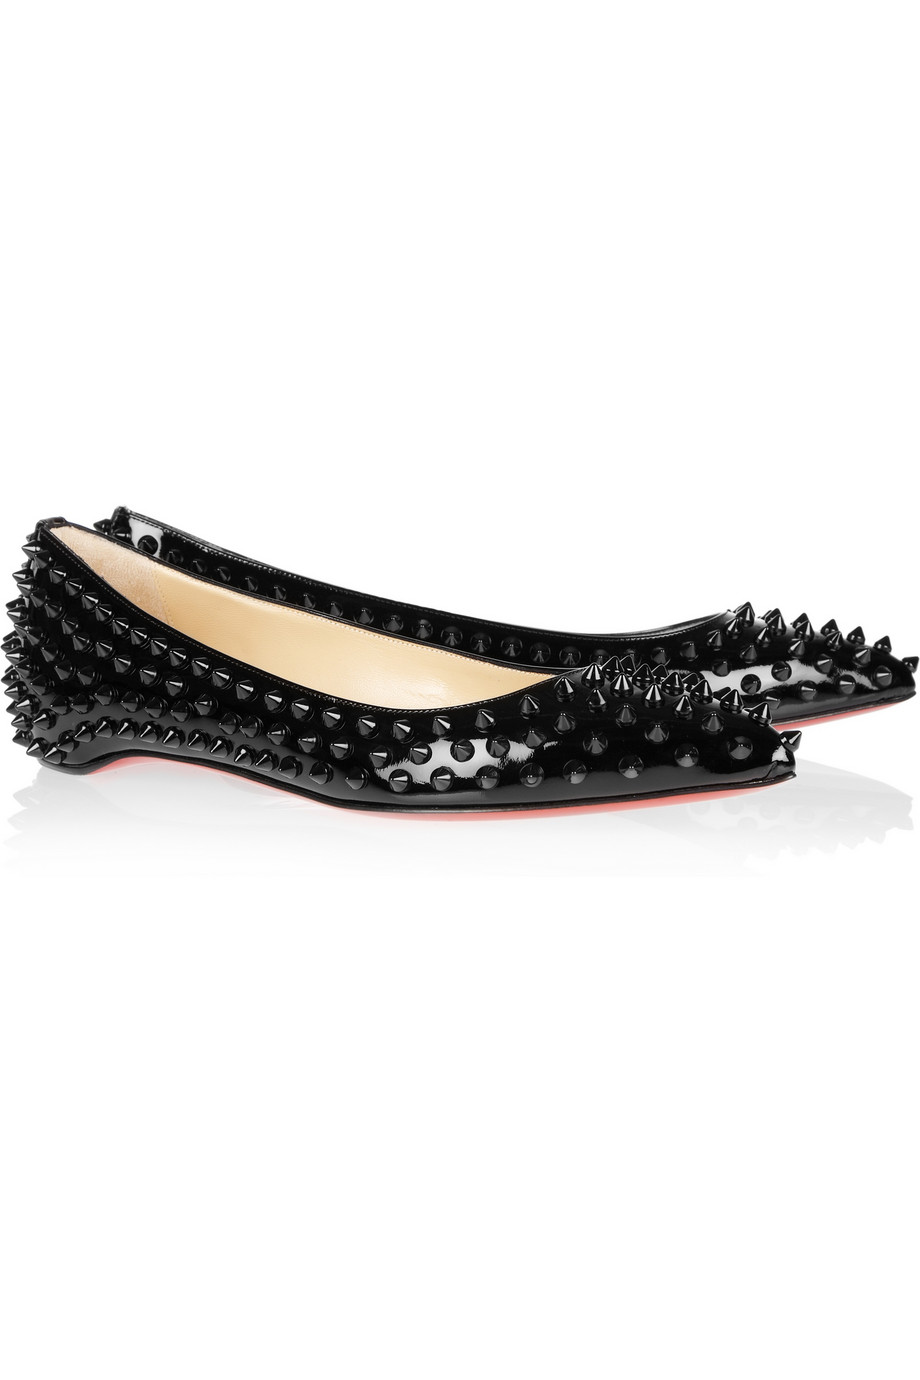 Christian Louboutin Pigalle Spikes Flat in Black | Lyst